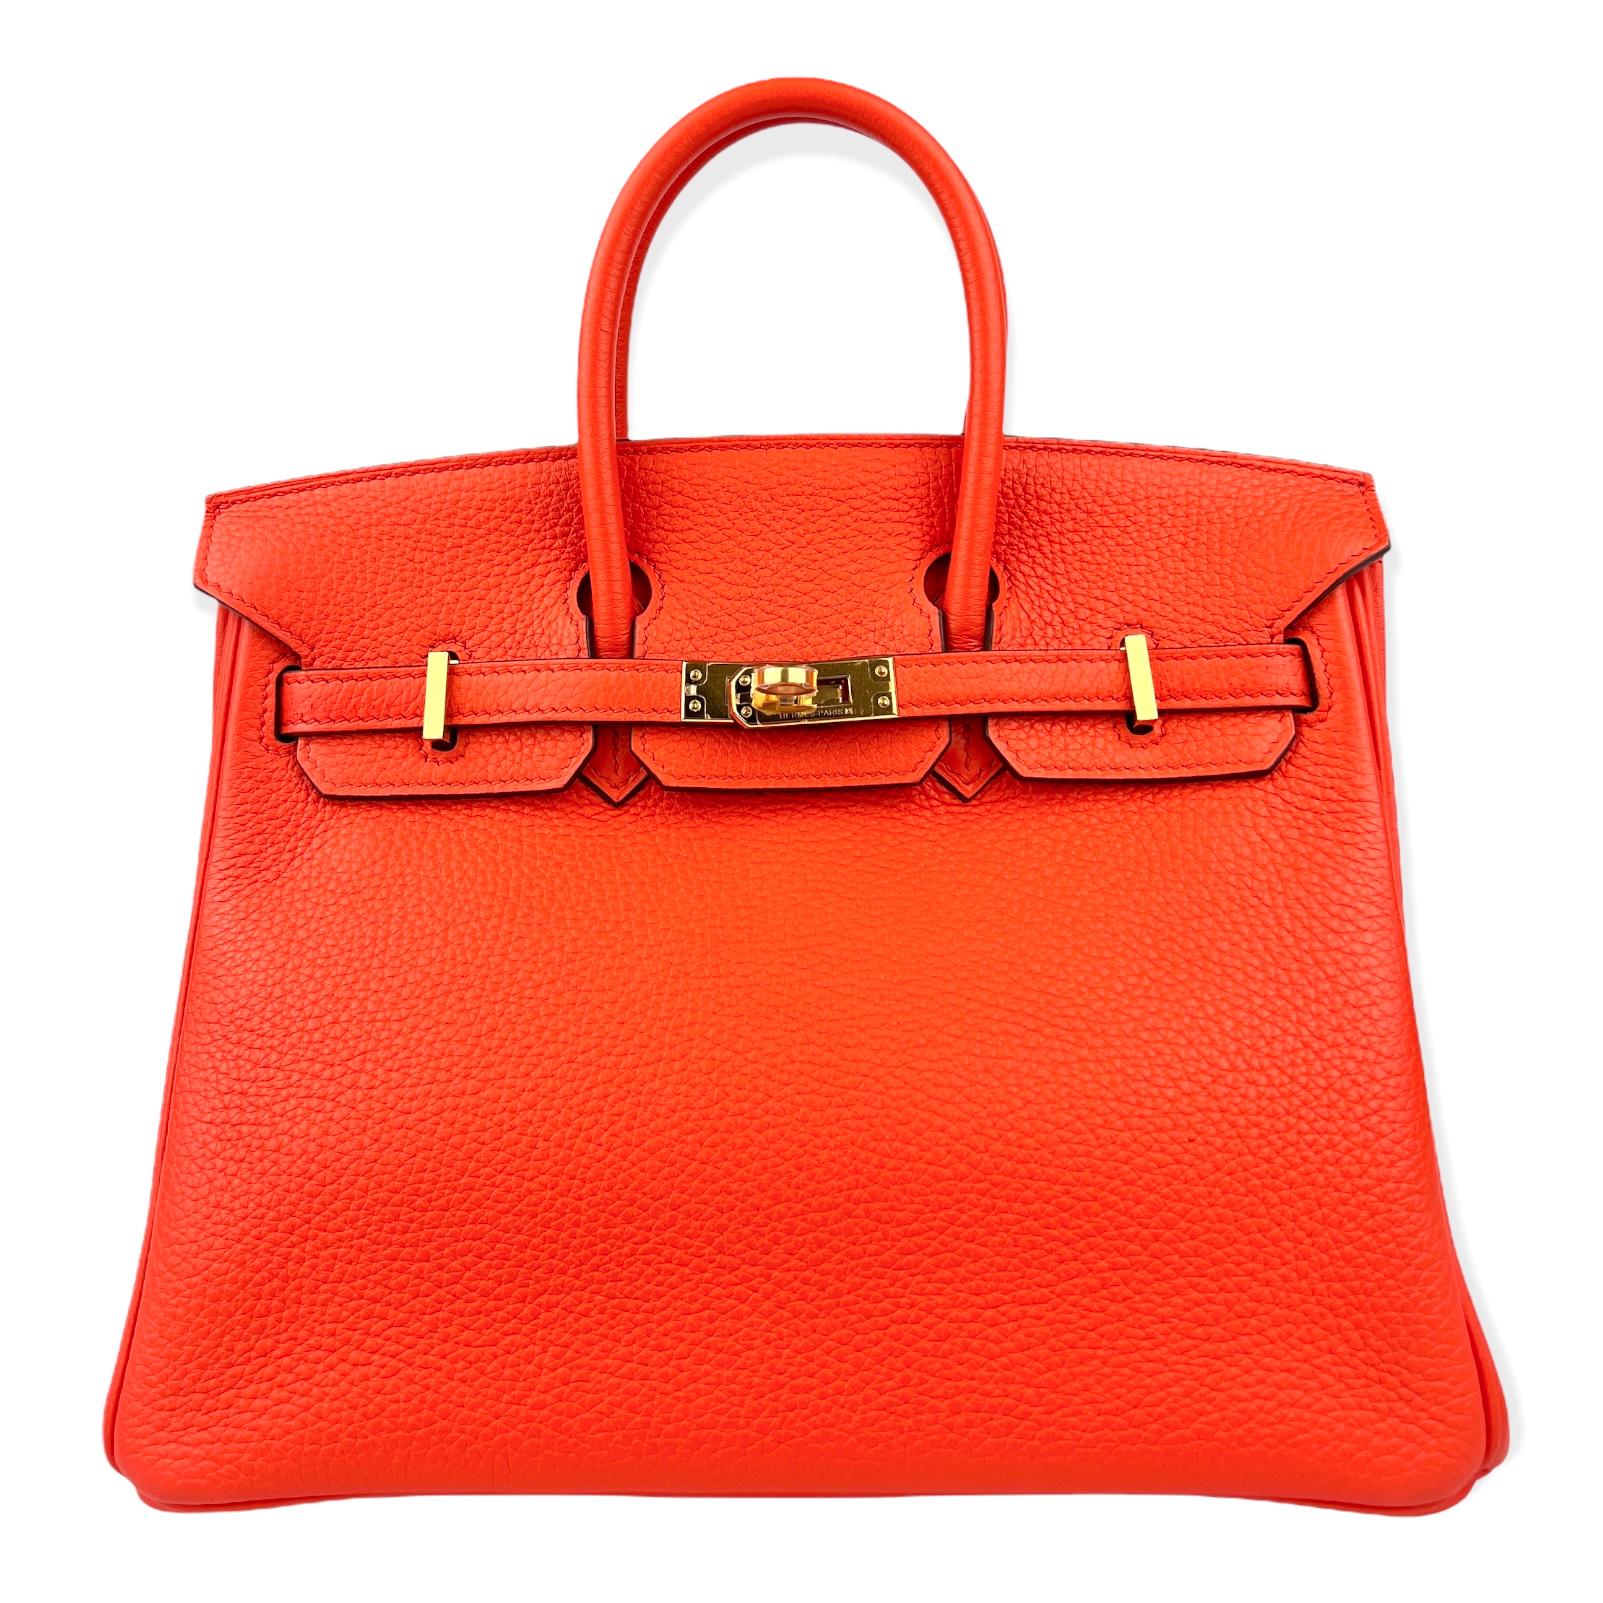 Rare Hermes Birkin 25 Poppy Orange Togo Leather Gold Hardware. Almost Like New with Plastic on Hardware, perfect corners and structure. 

Shop With Confidence from Lux Addicts. Authenticity Guaranteed!